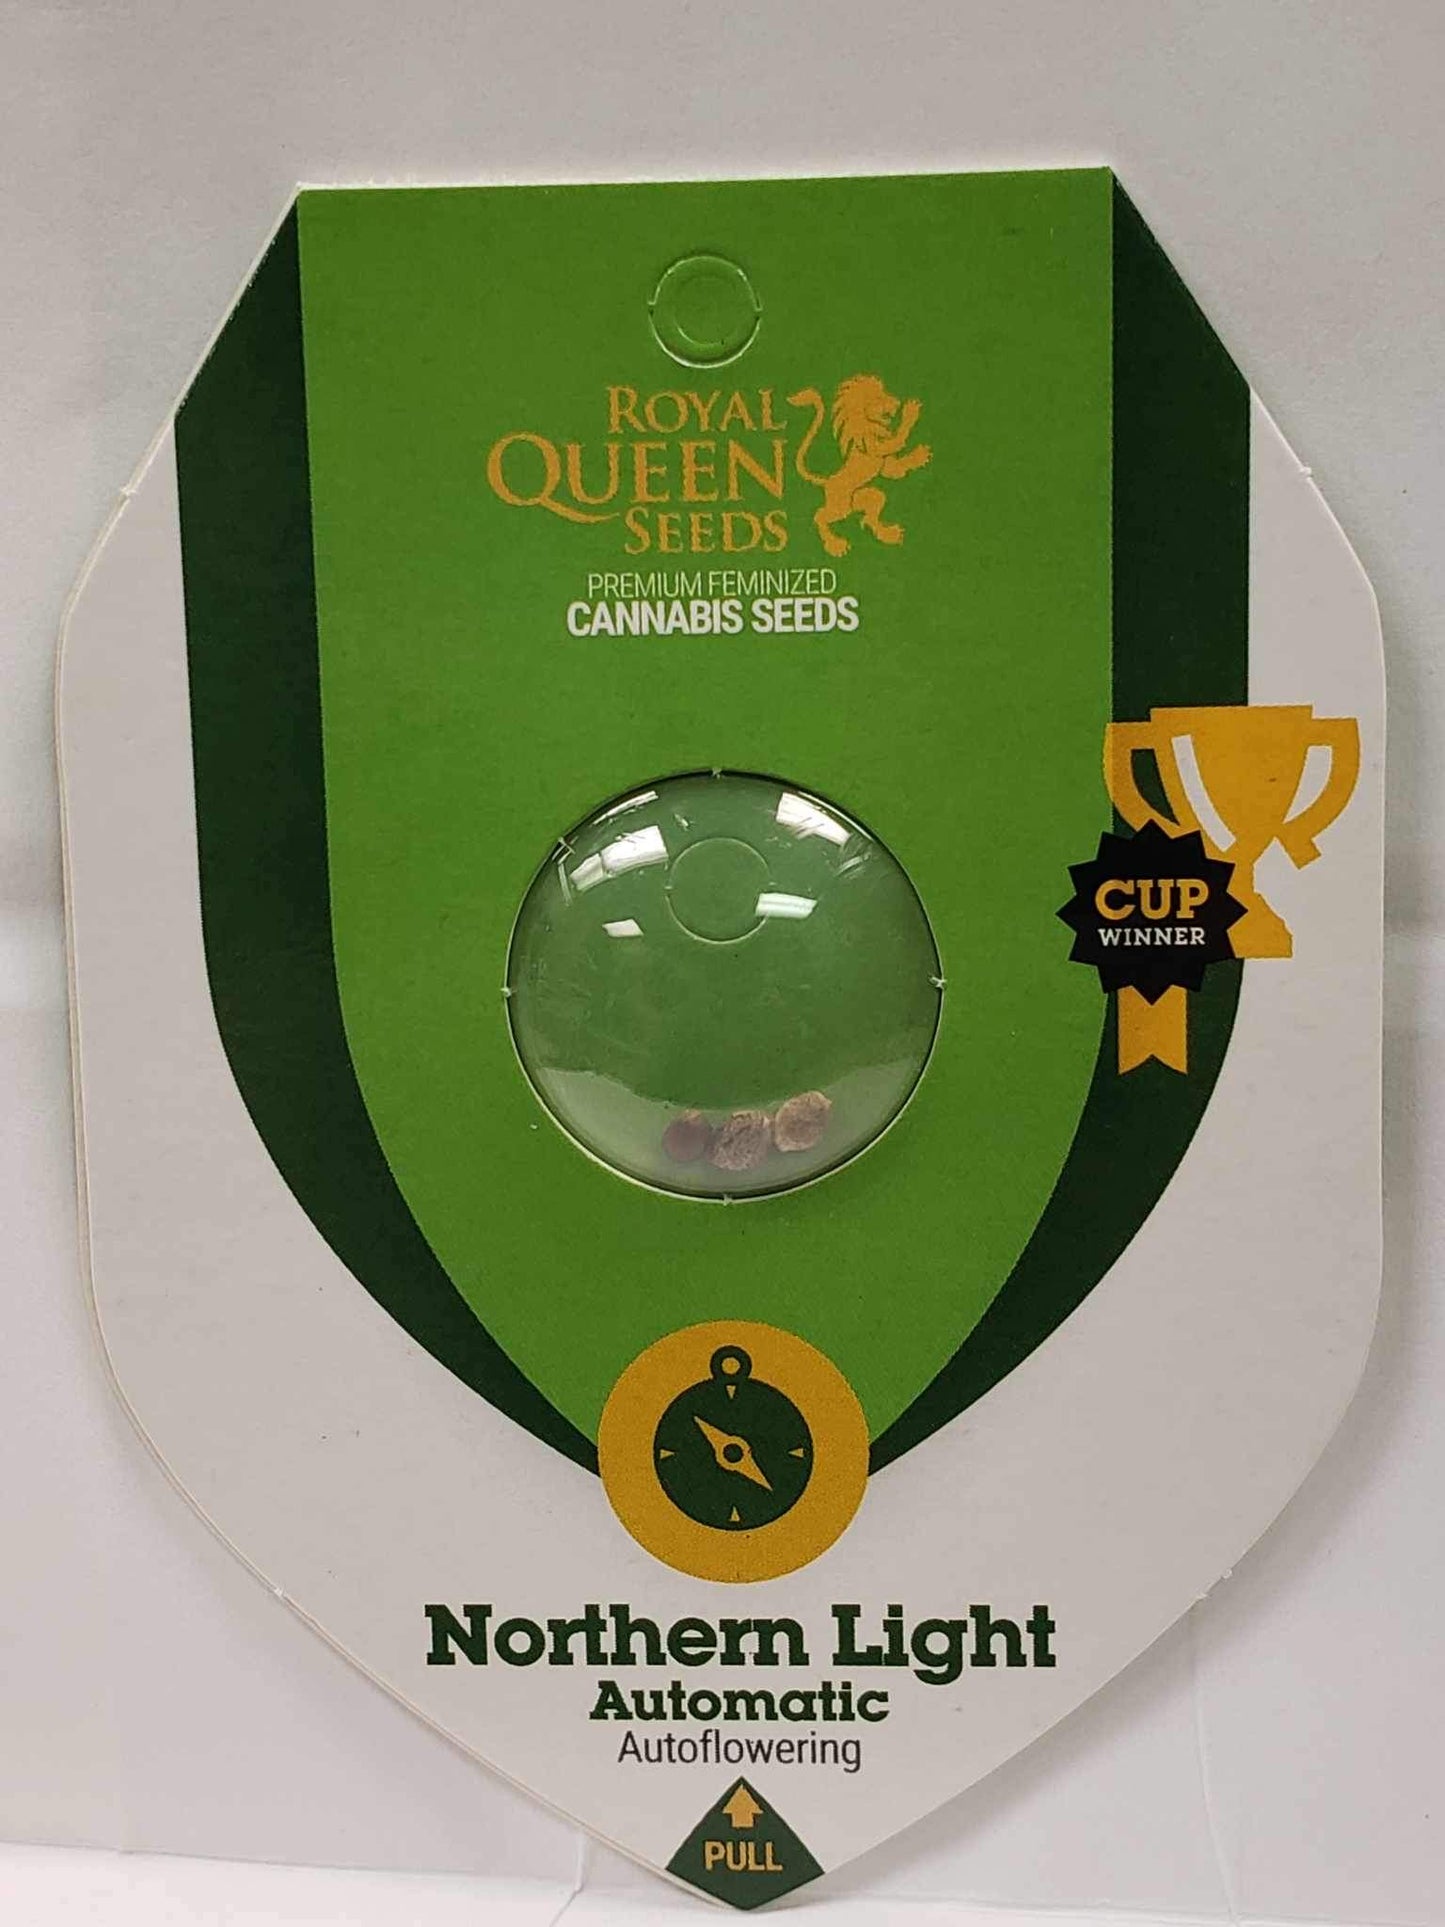 Royal Queen Northern Light Auto Seeds